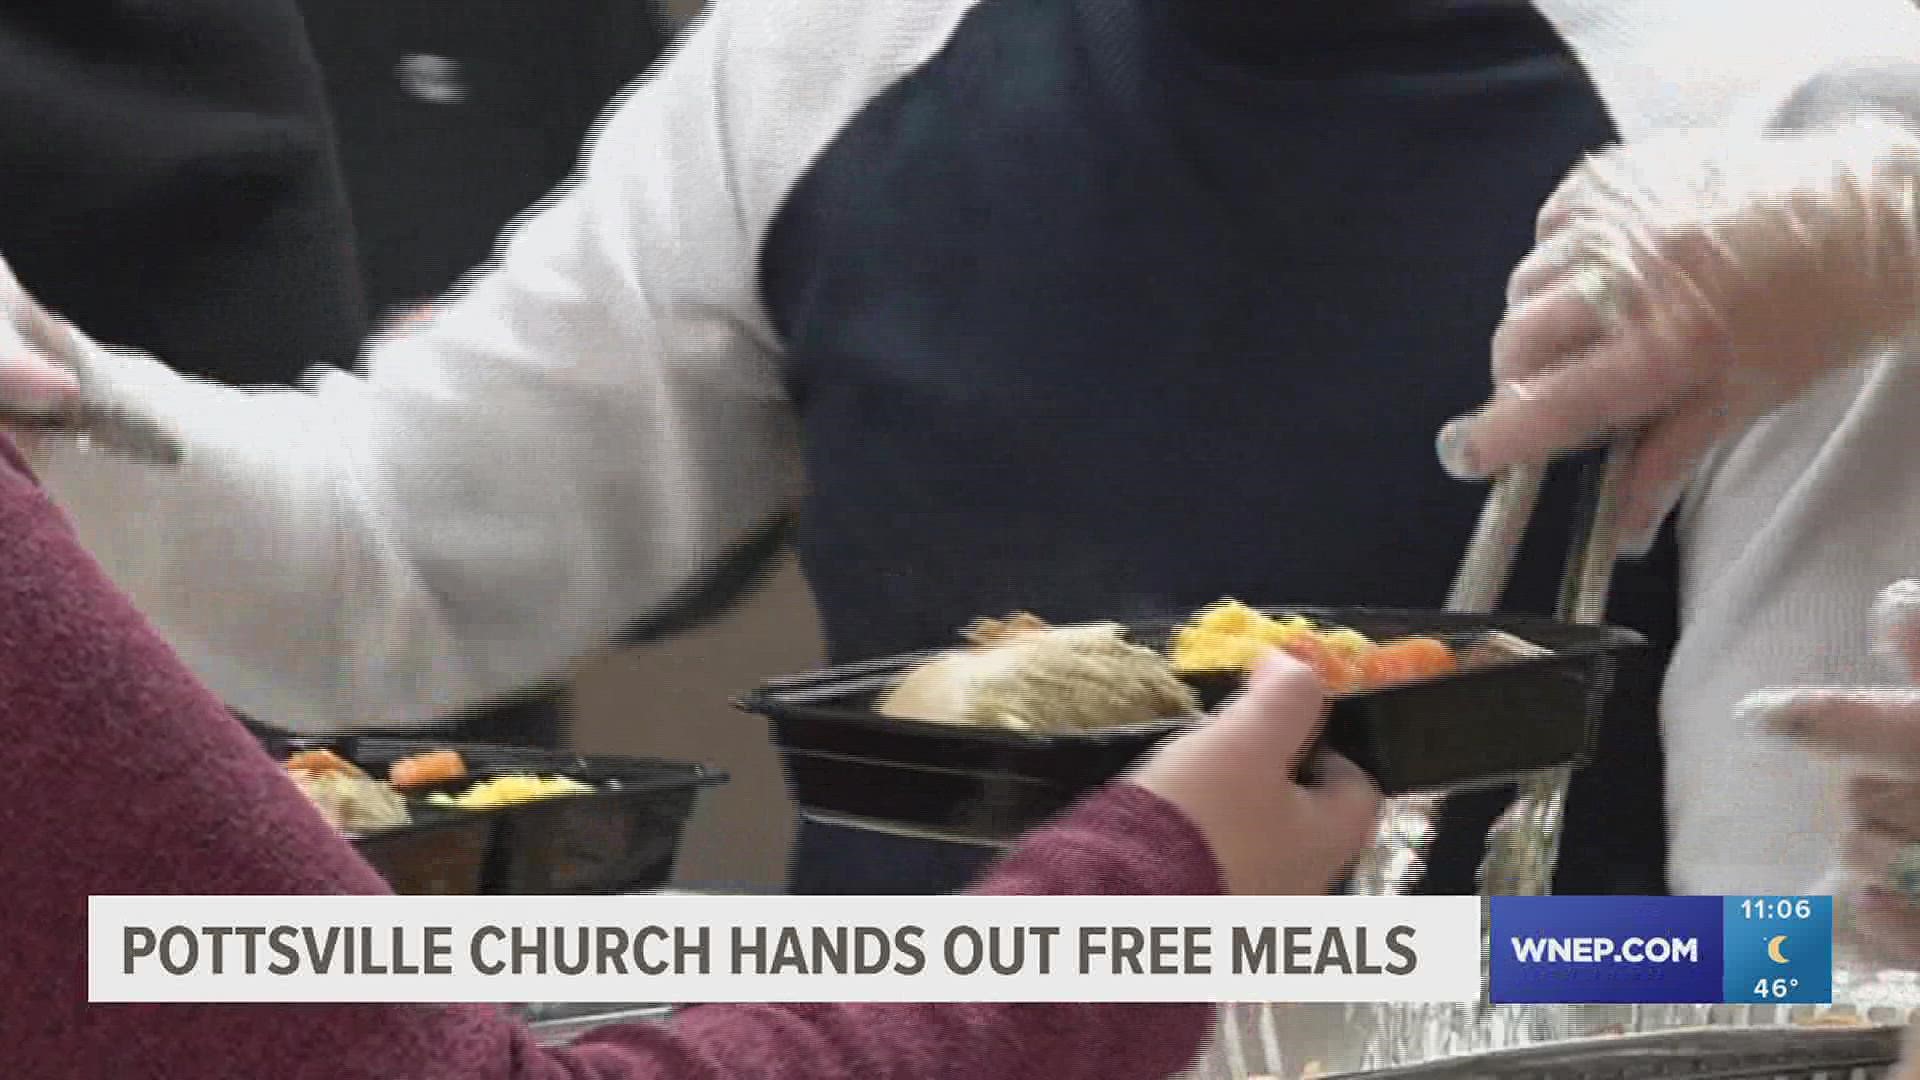 To make sure everyone had a chance to enjoy a hot Thanksgiving meal, volunteers spent their morning packing over a thousand free meals for pick up or delivery.